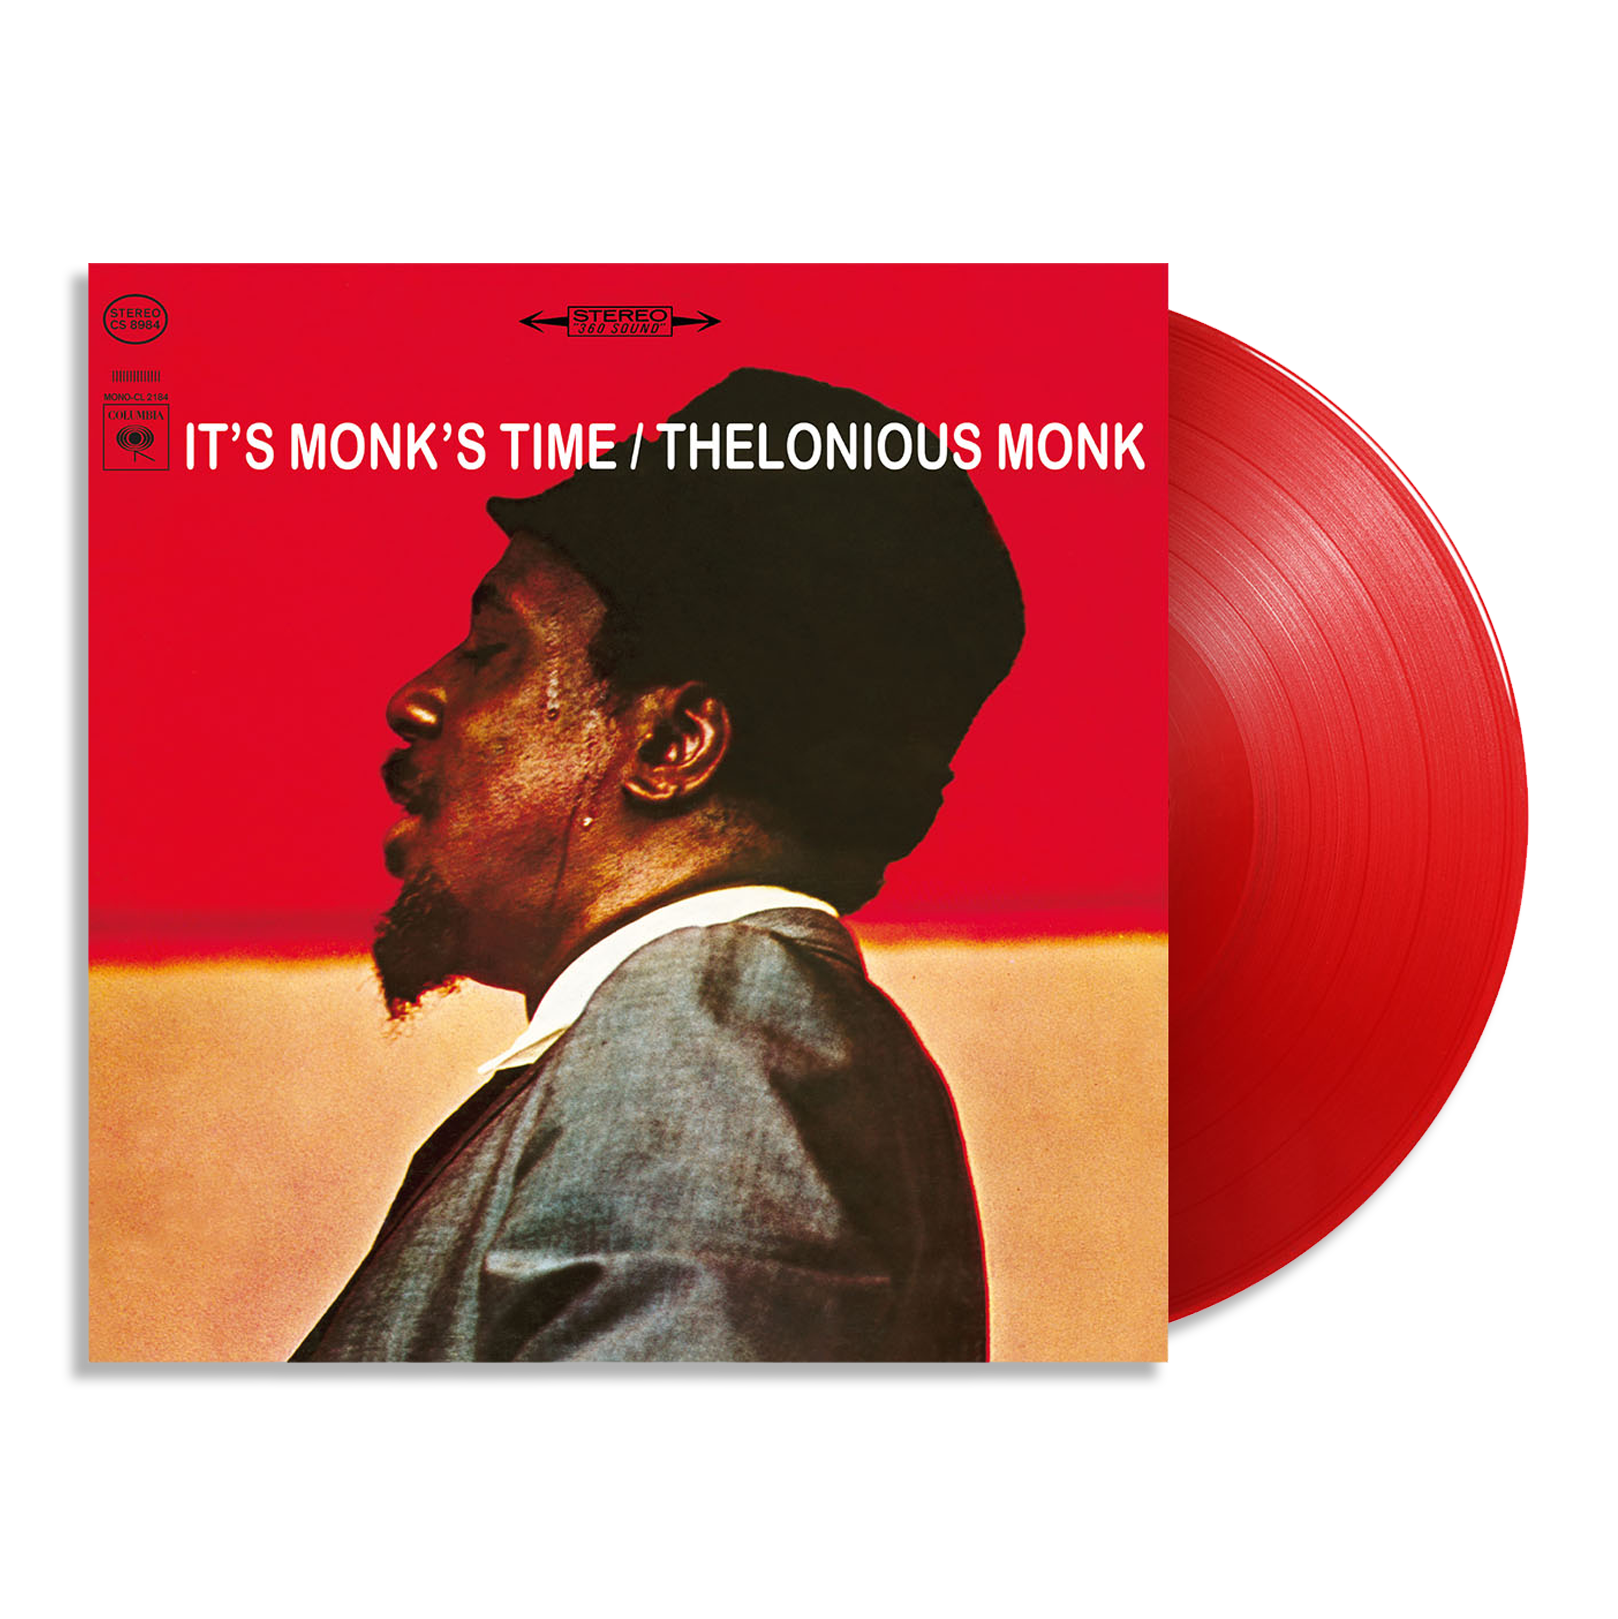 Thelonious Monk - It's Monk's Time: Limited Red Vinyl LP